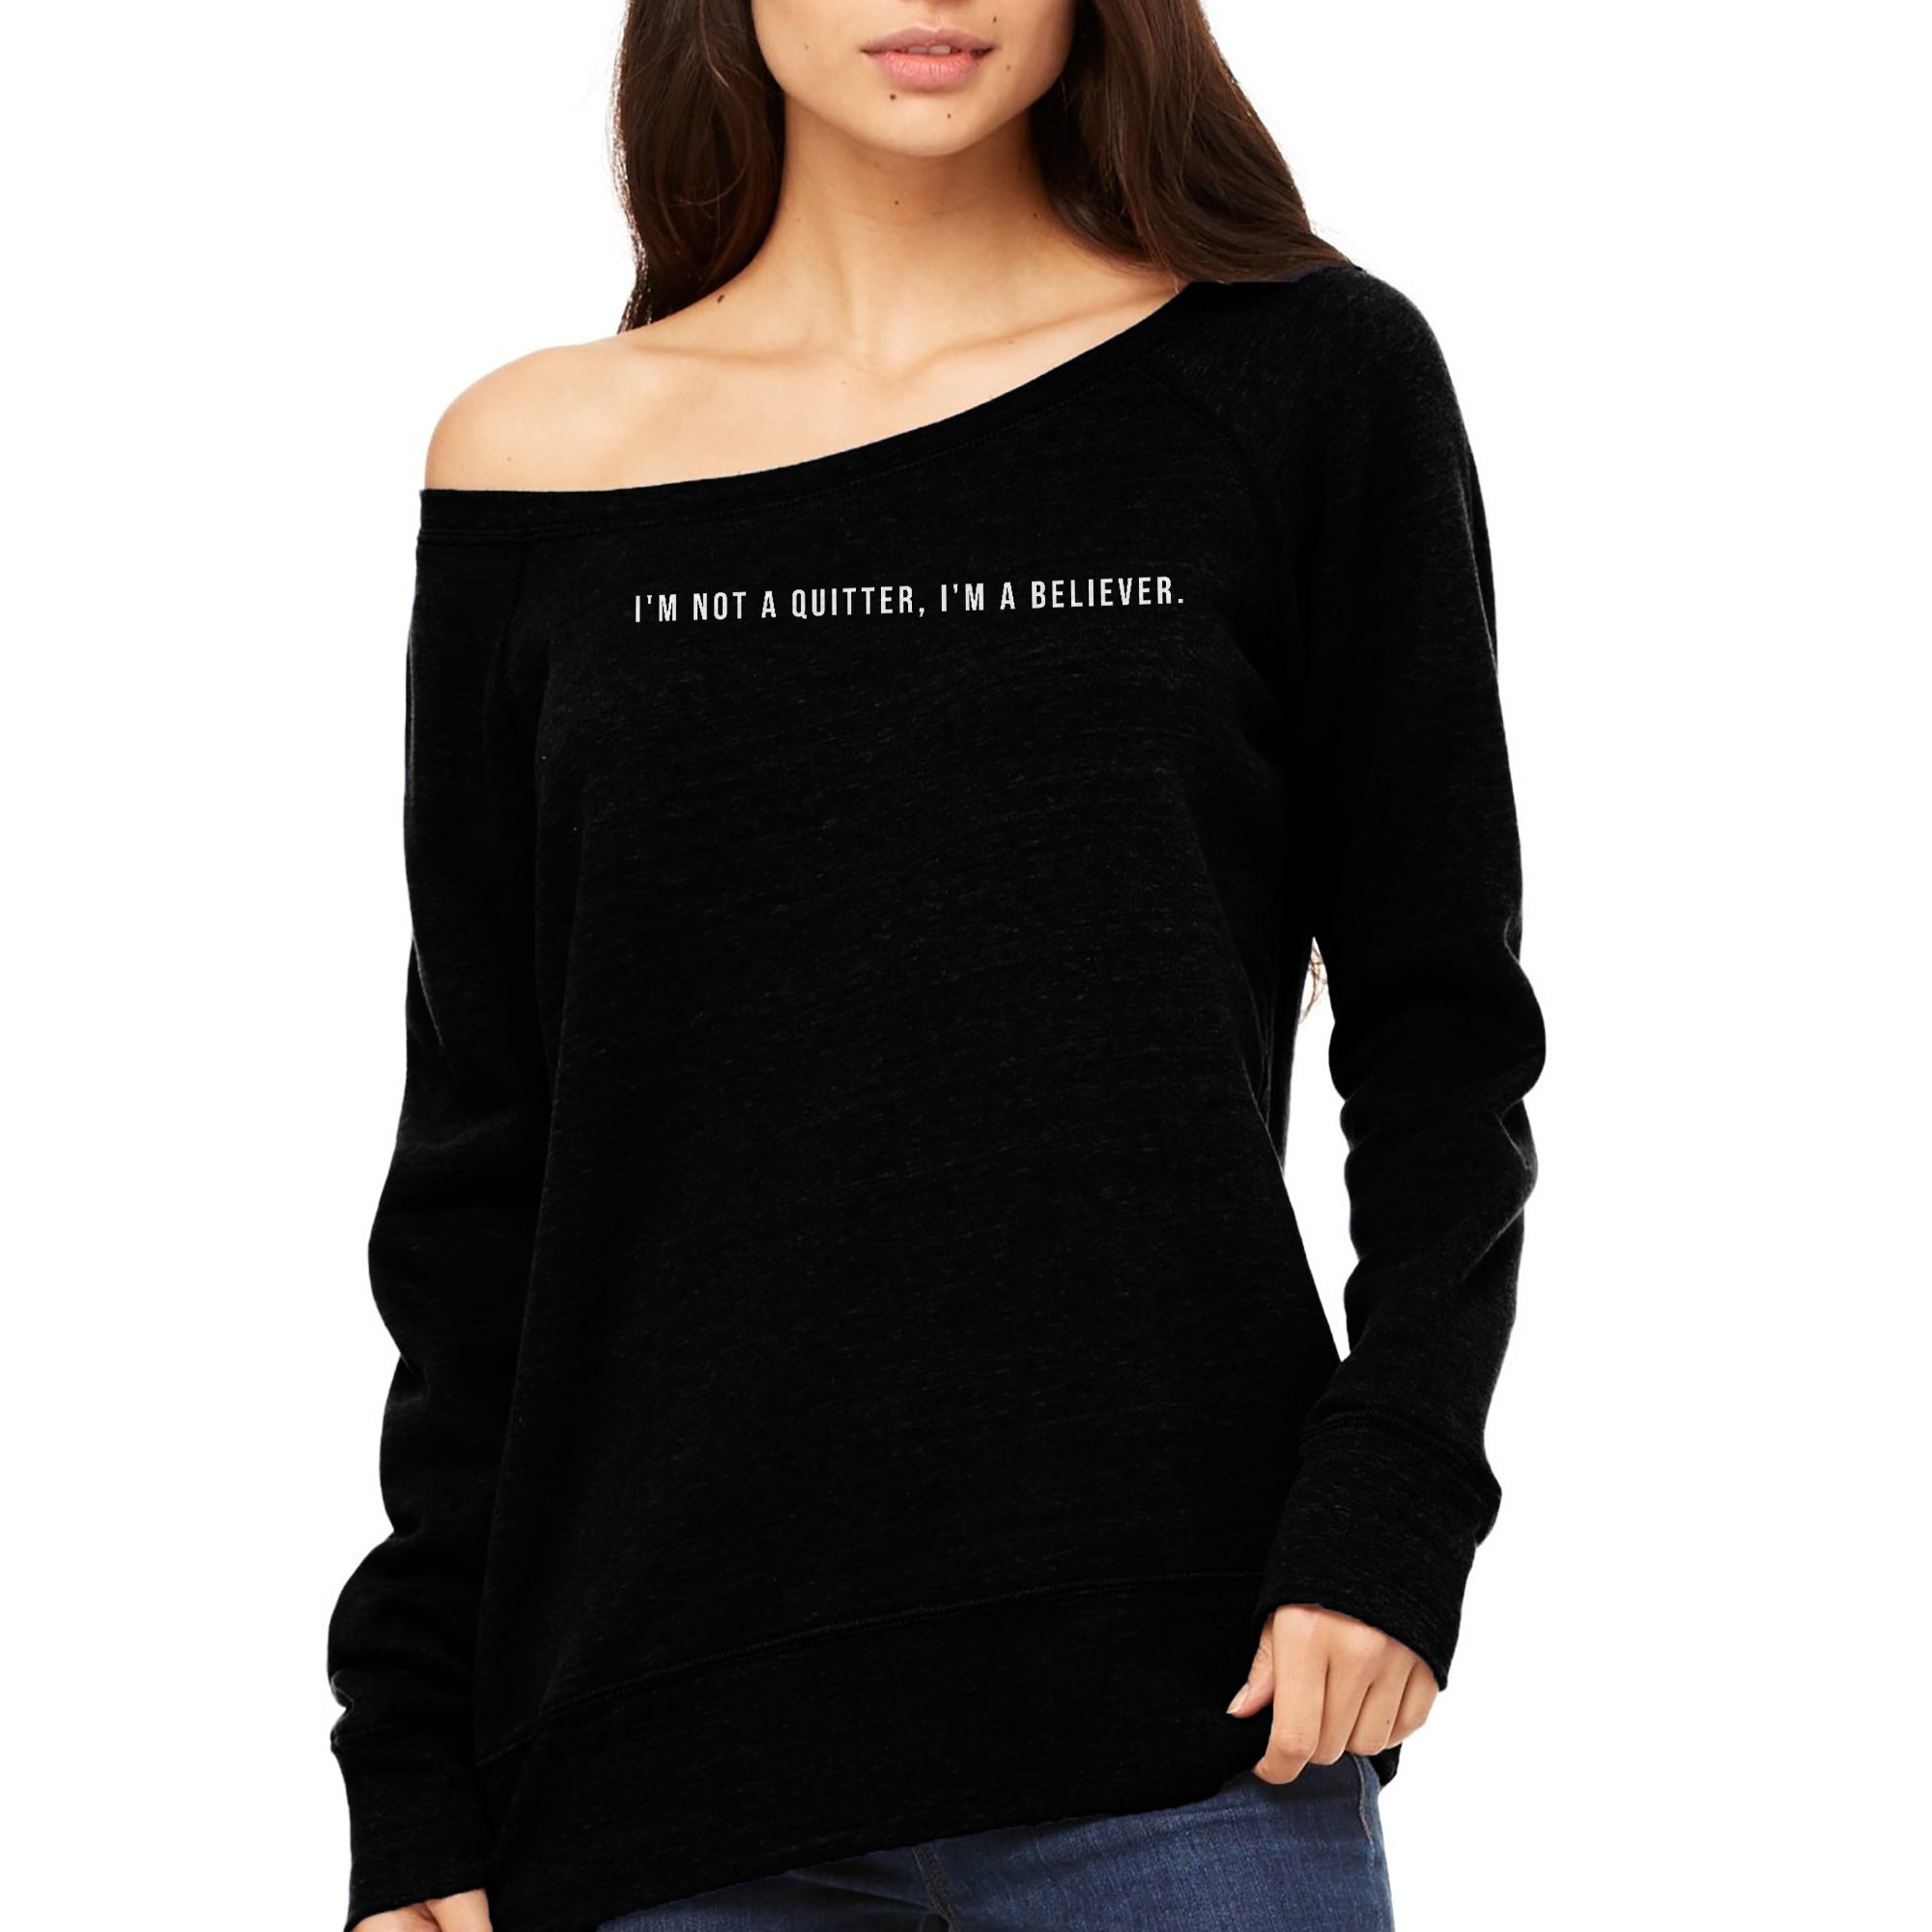 I'm Not a Quitter, I'm a Believer Slouchy Fleece Solid Black Image